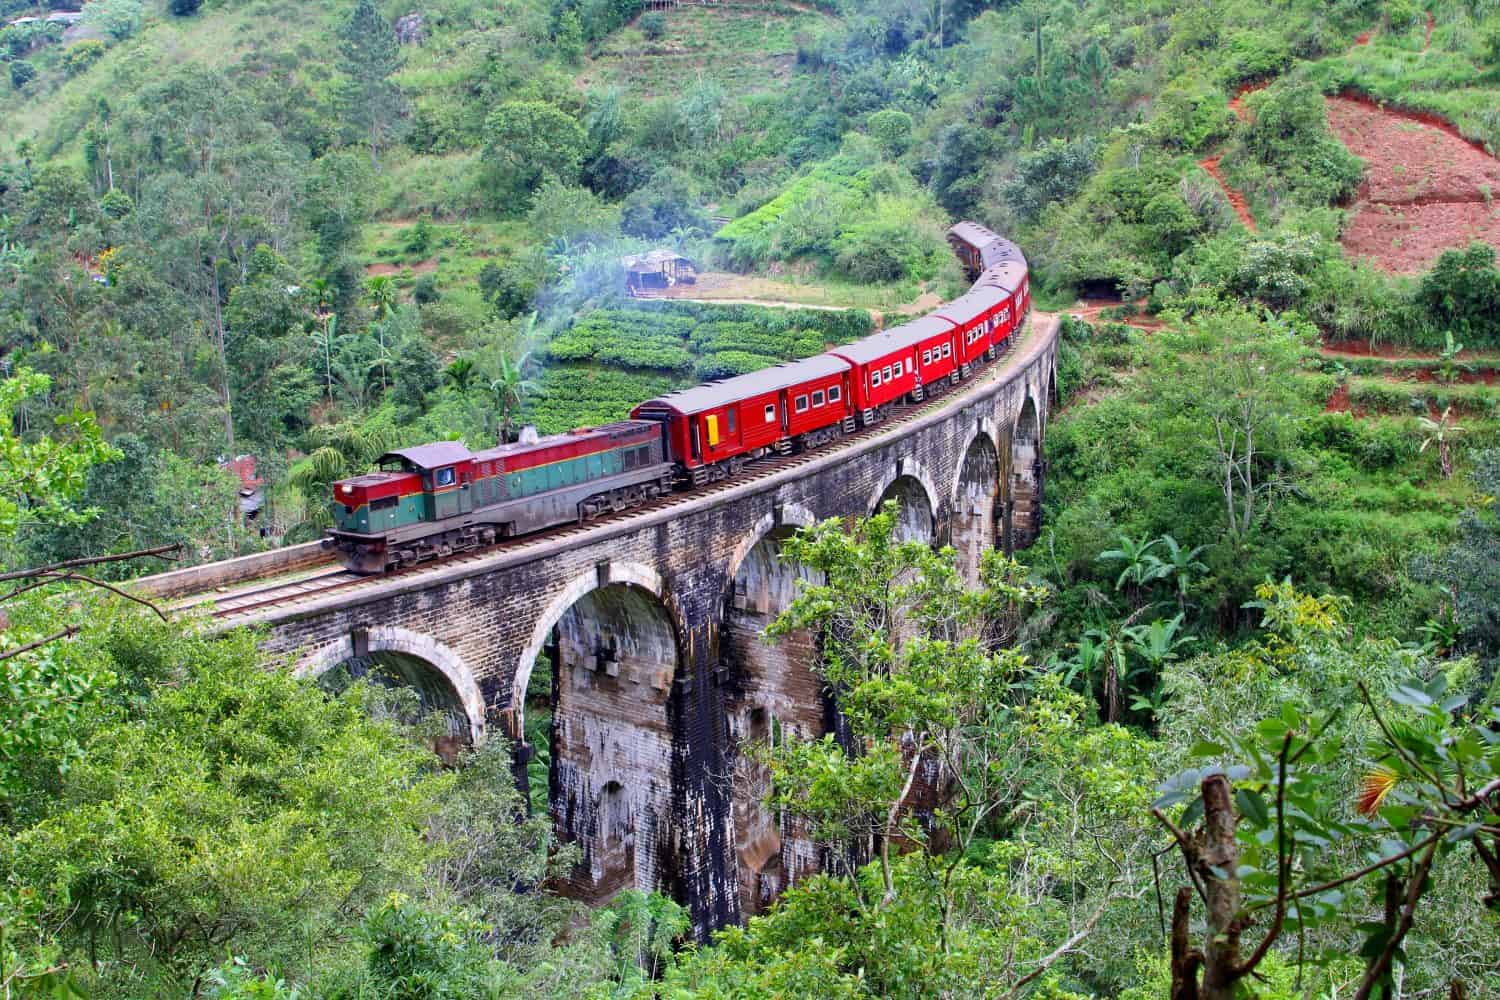 Red train with steam locomotive drives from Ella to Nuwara Eliya and Kandy over old Nine Arches bridge in jungle mountain landscapes. Uva Province, Sri Lanka